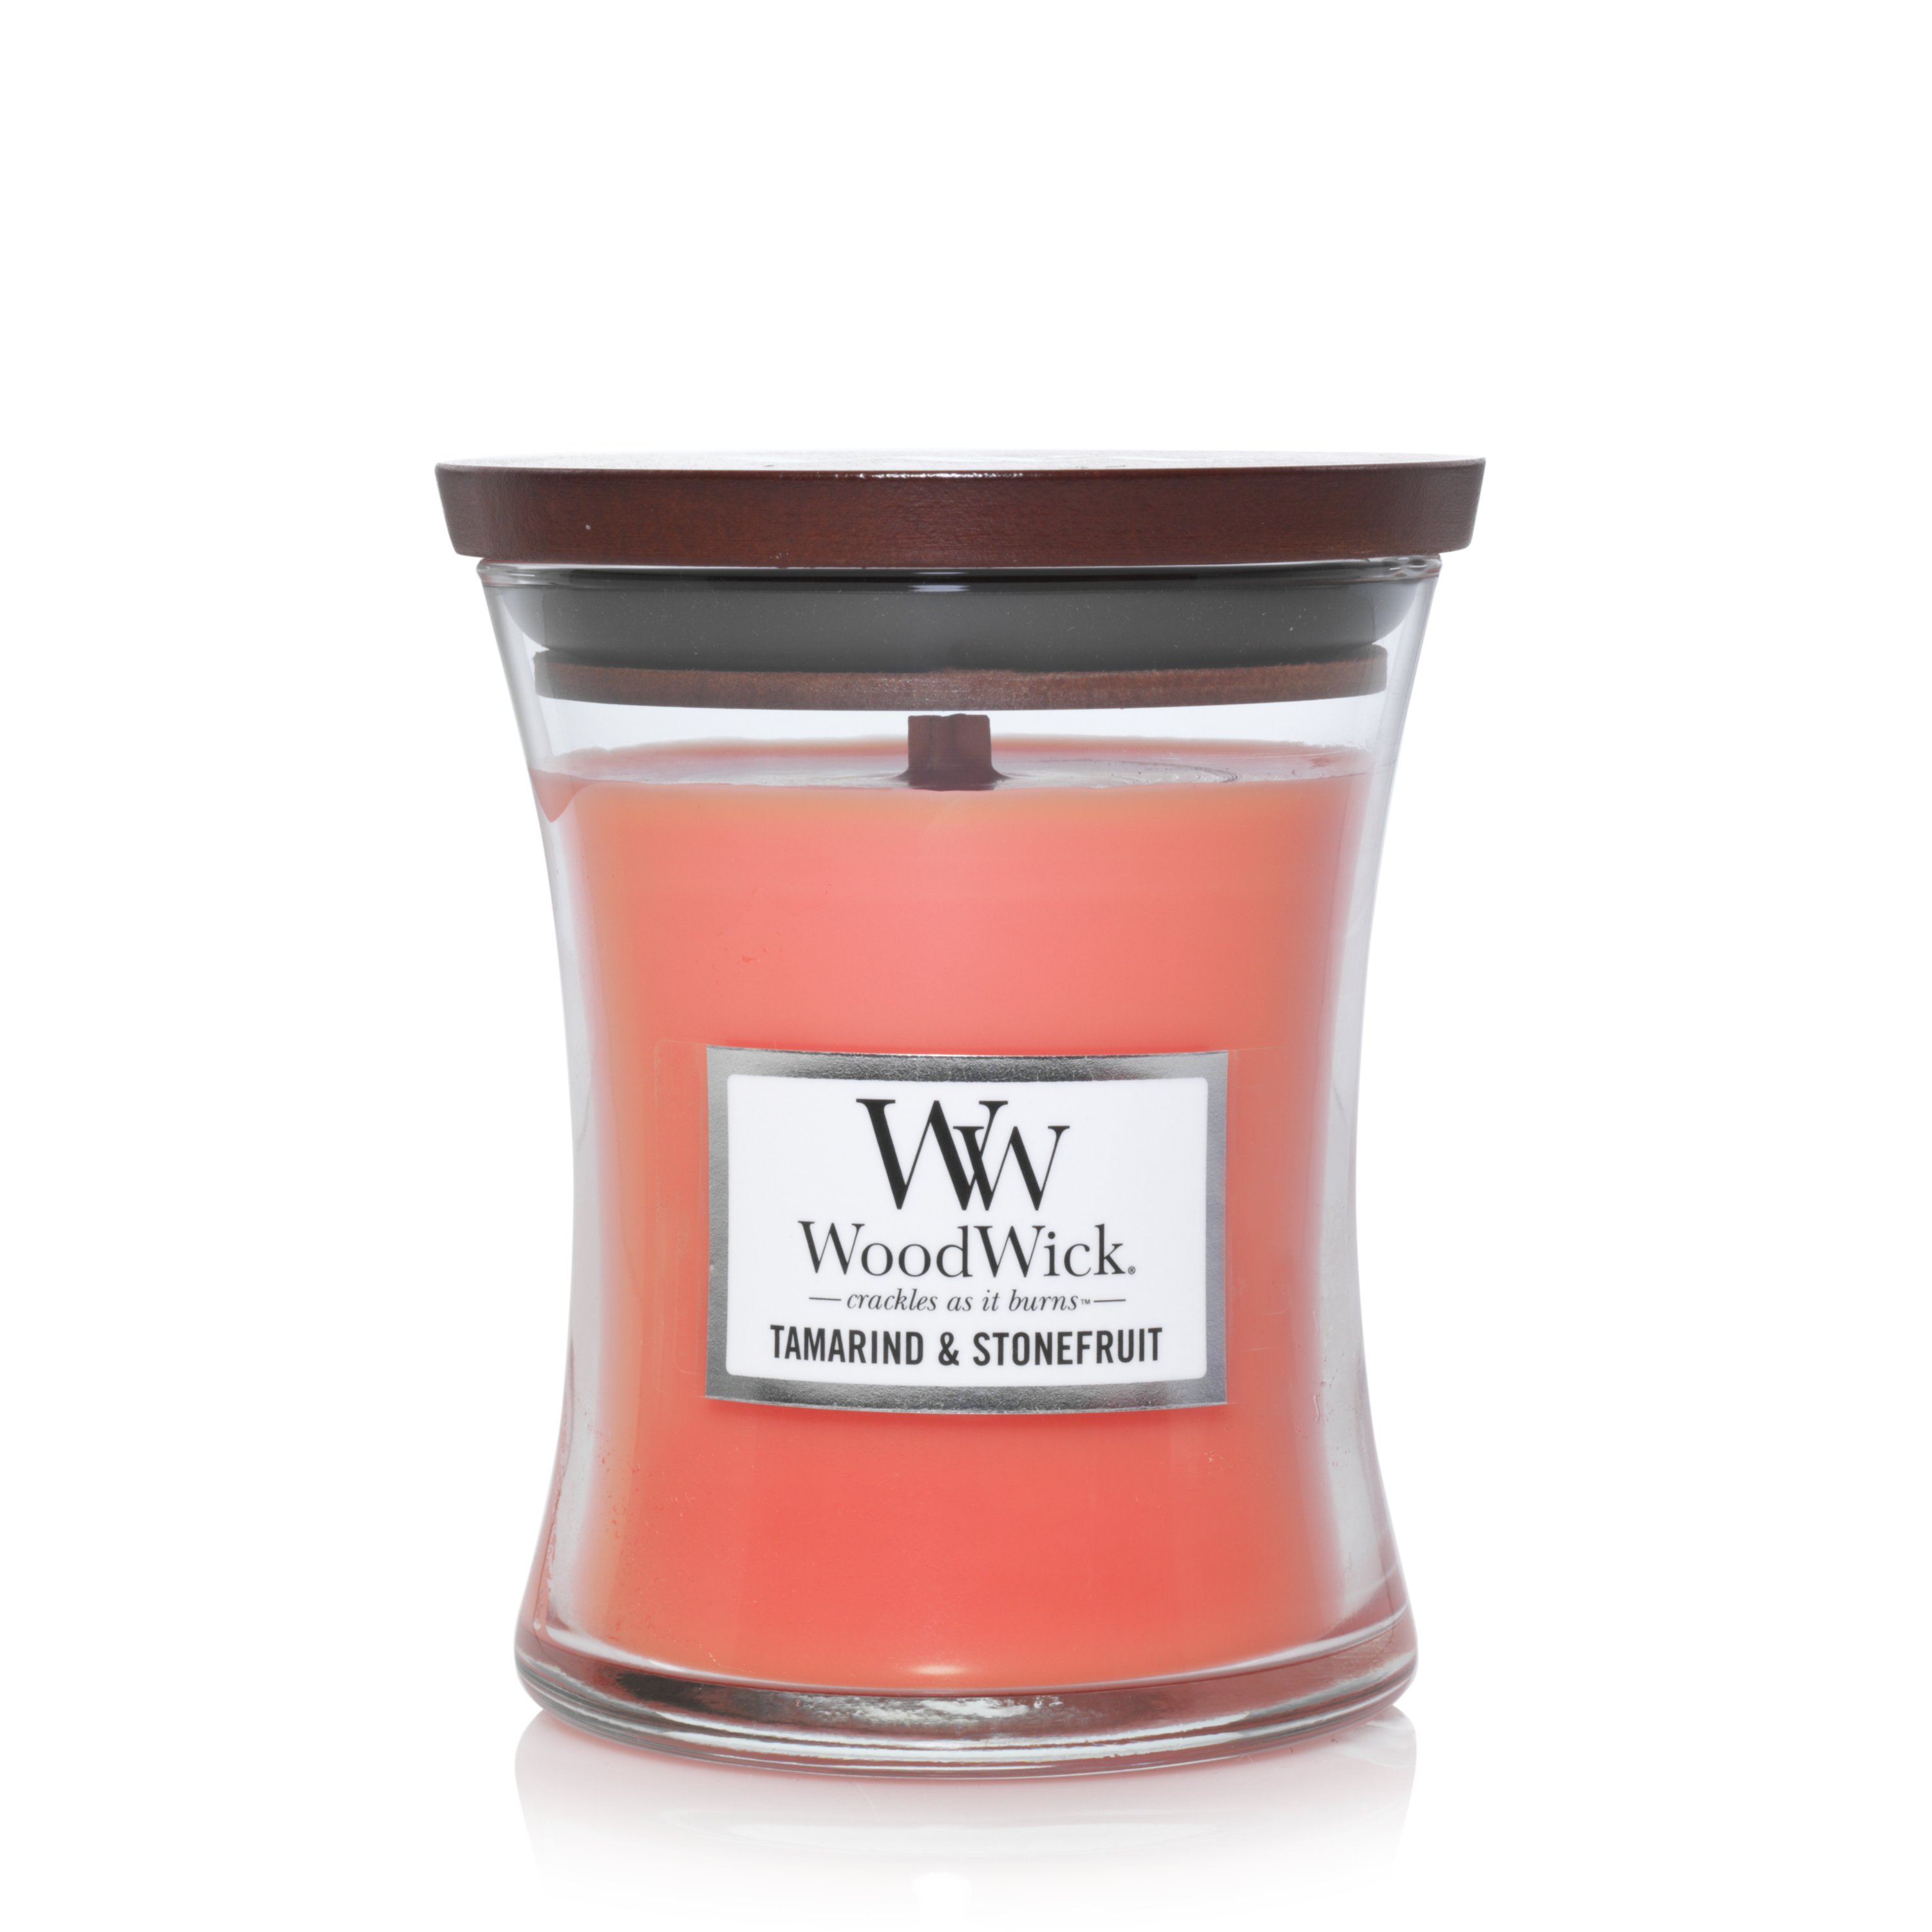 CHERRY BARK WoodWick 10oz Scented Jar Candle Burns 100 Hours 